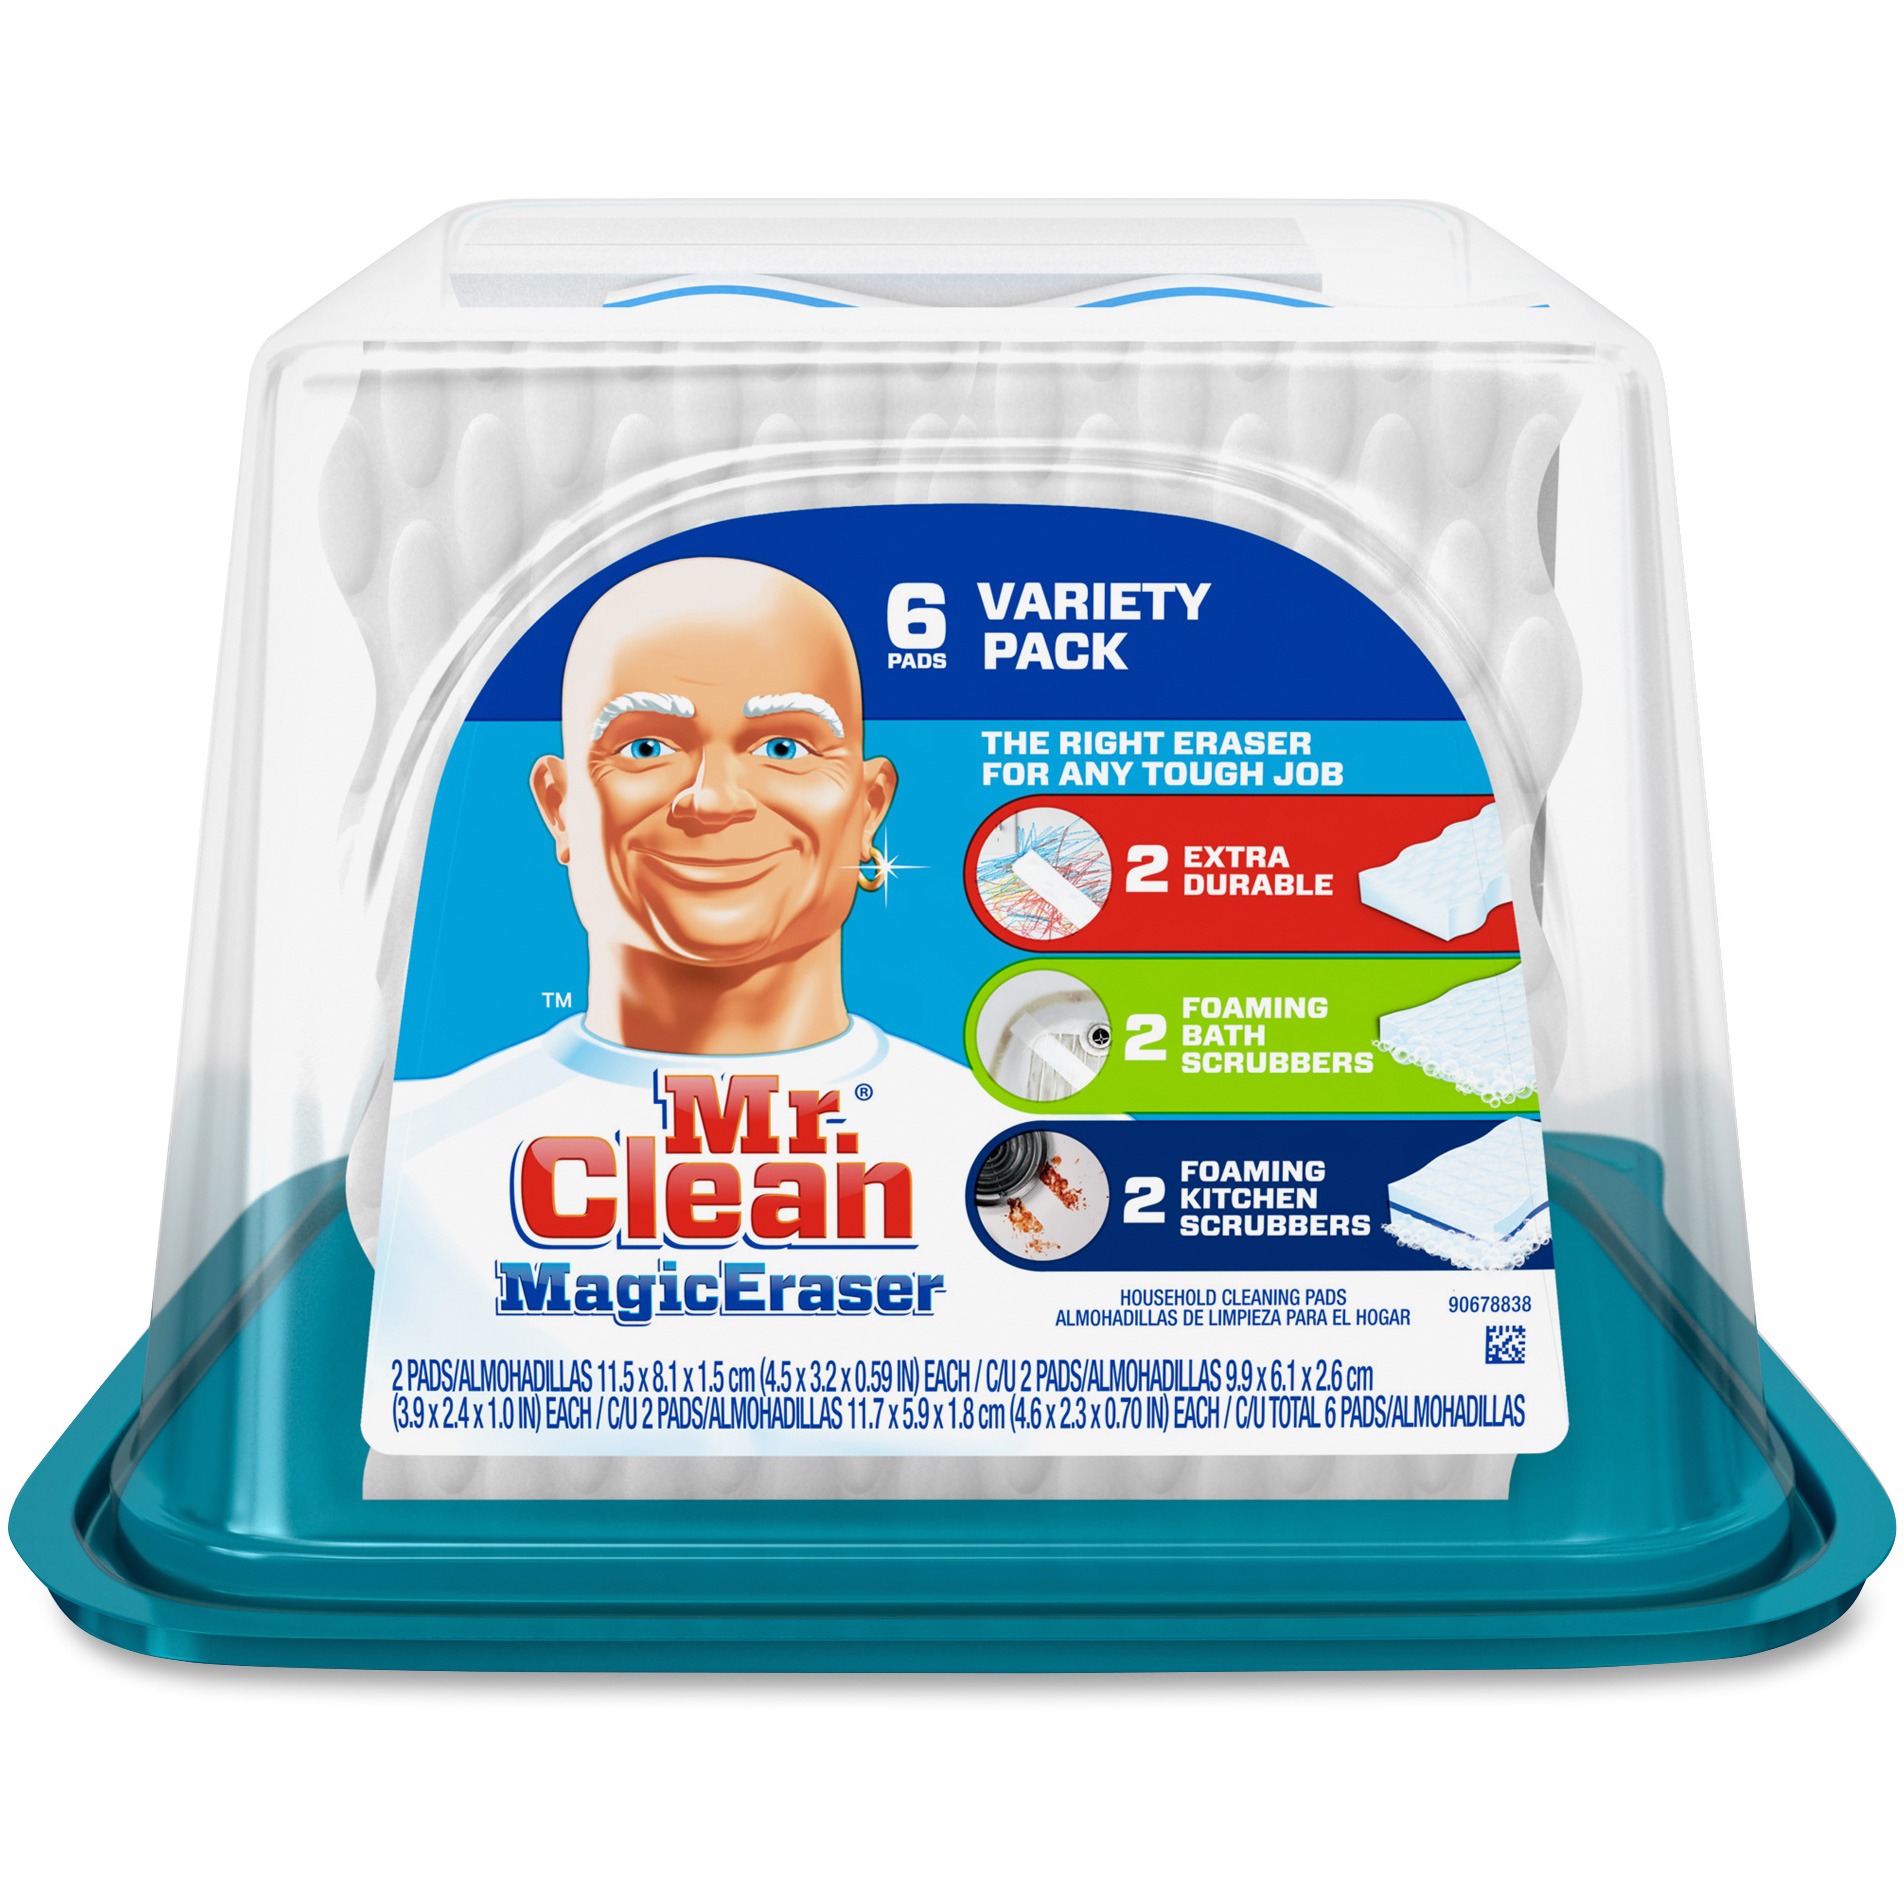 Mr. Clean Magic Eraser Cleaning Pads with Durafoam, Variety Pk, 6 Ct - image 1 of 11